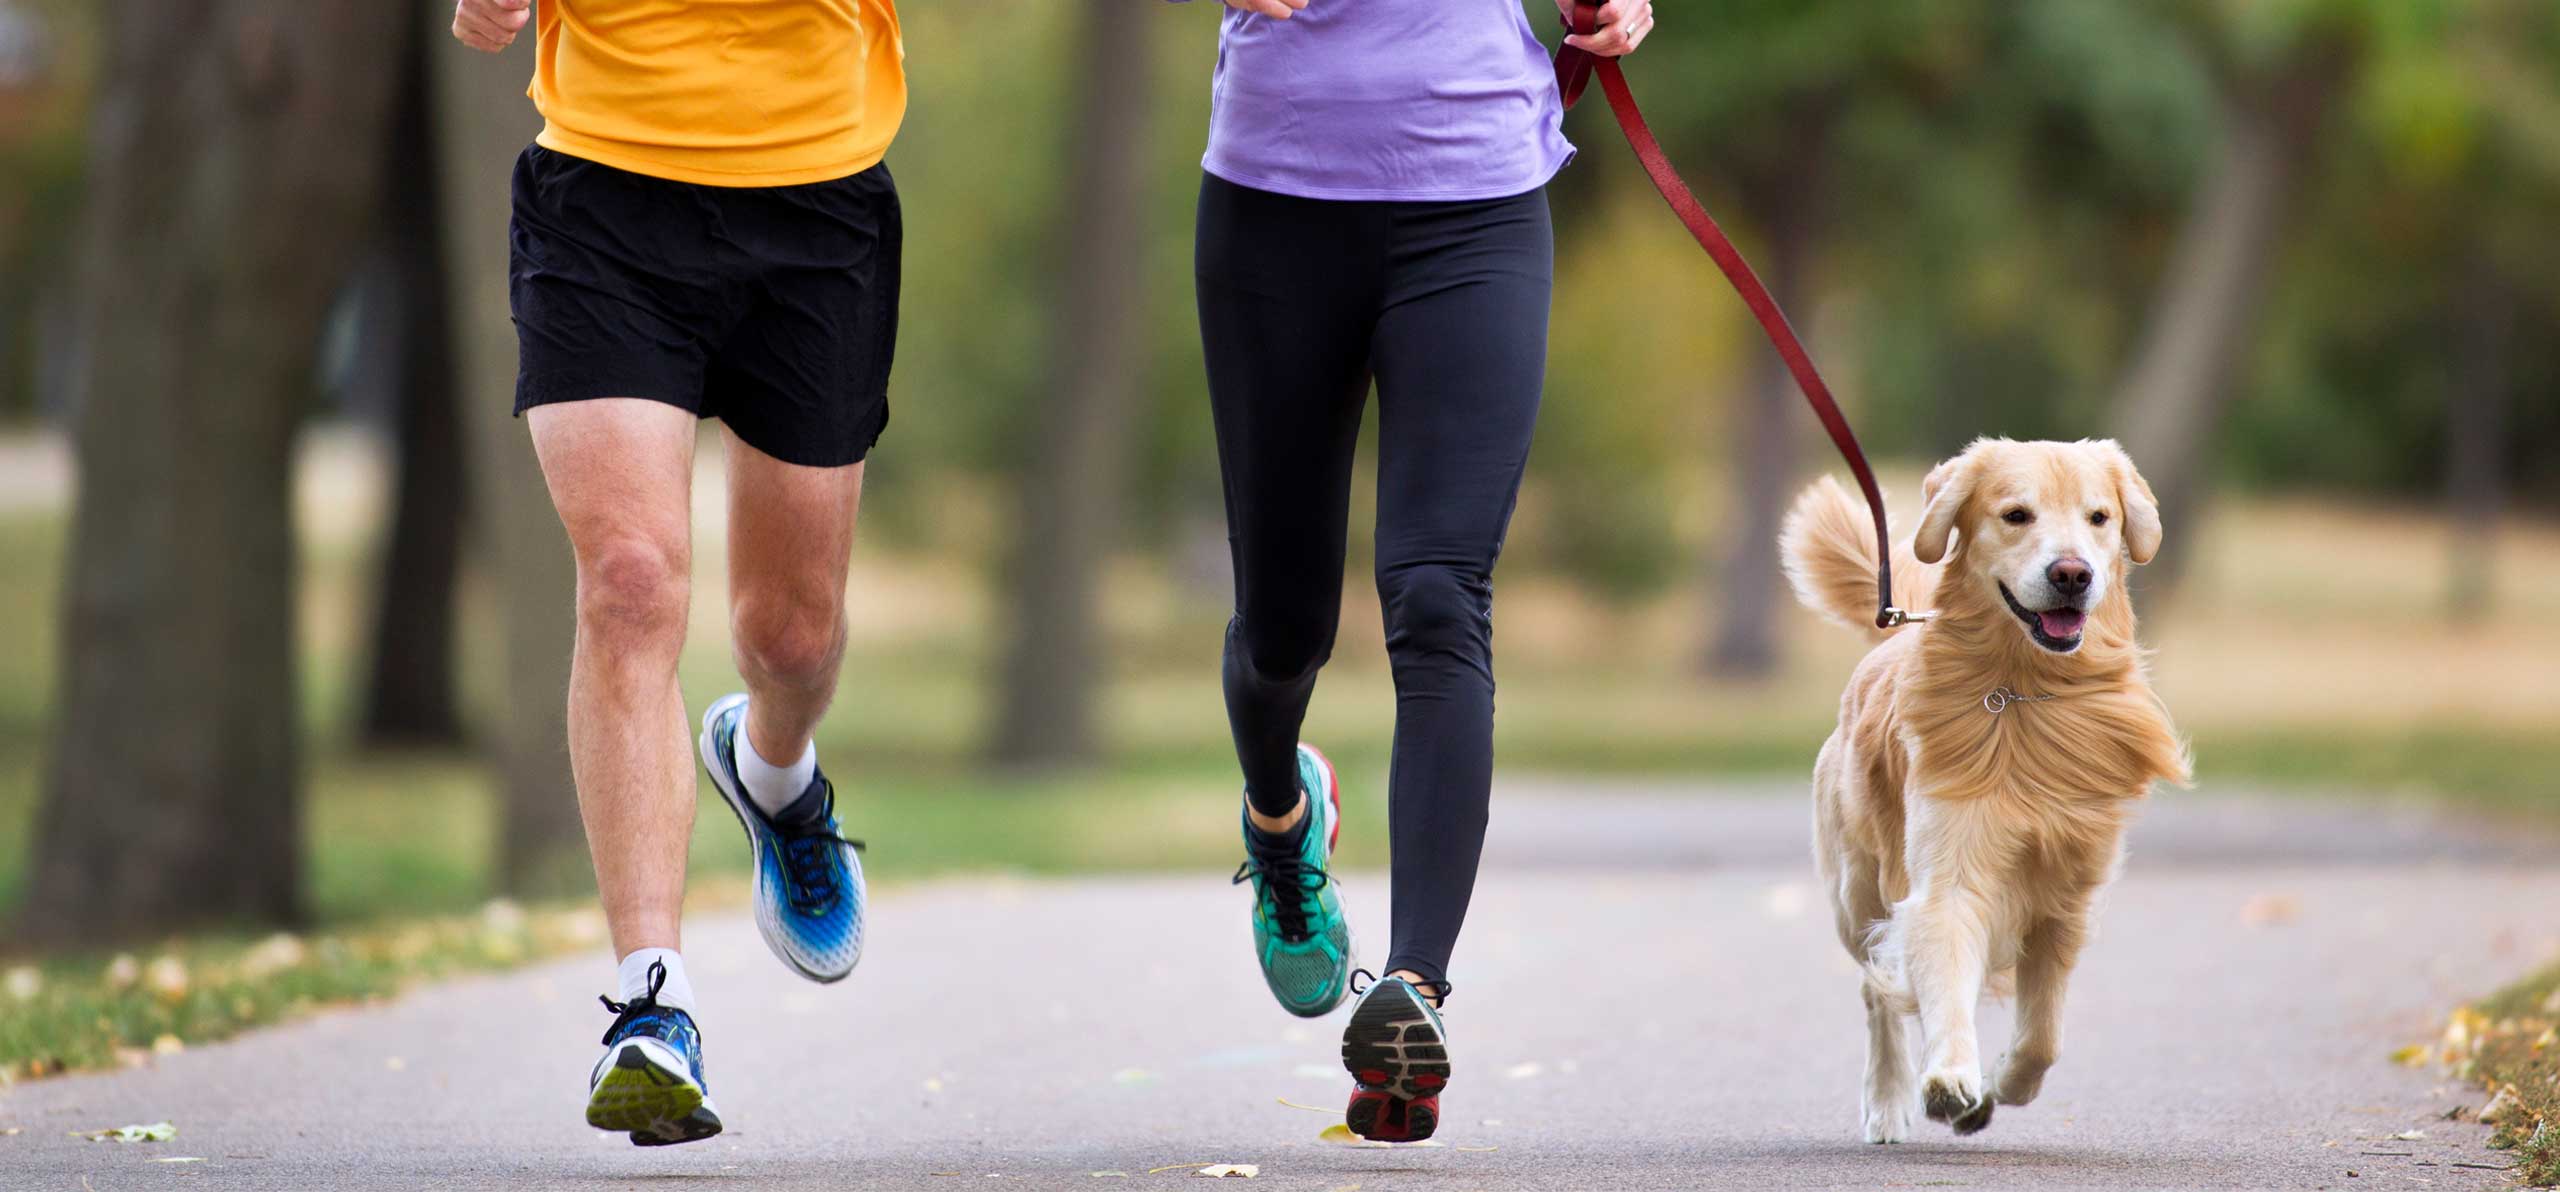 dog smiling and running along side a couple runners